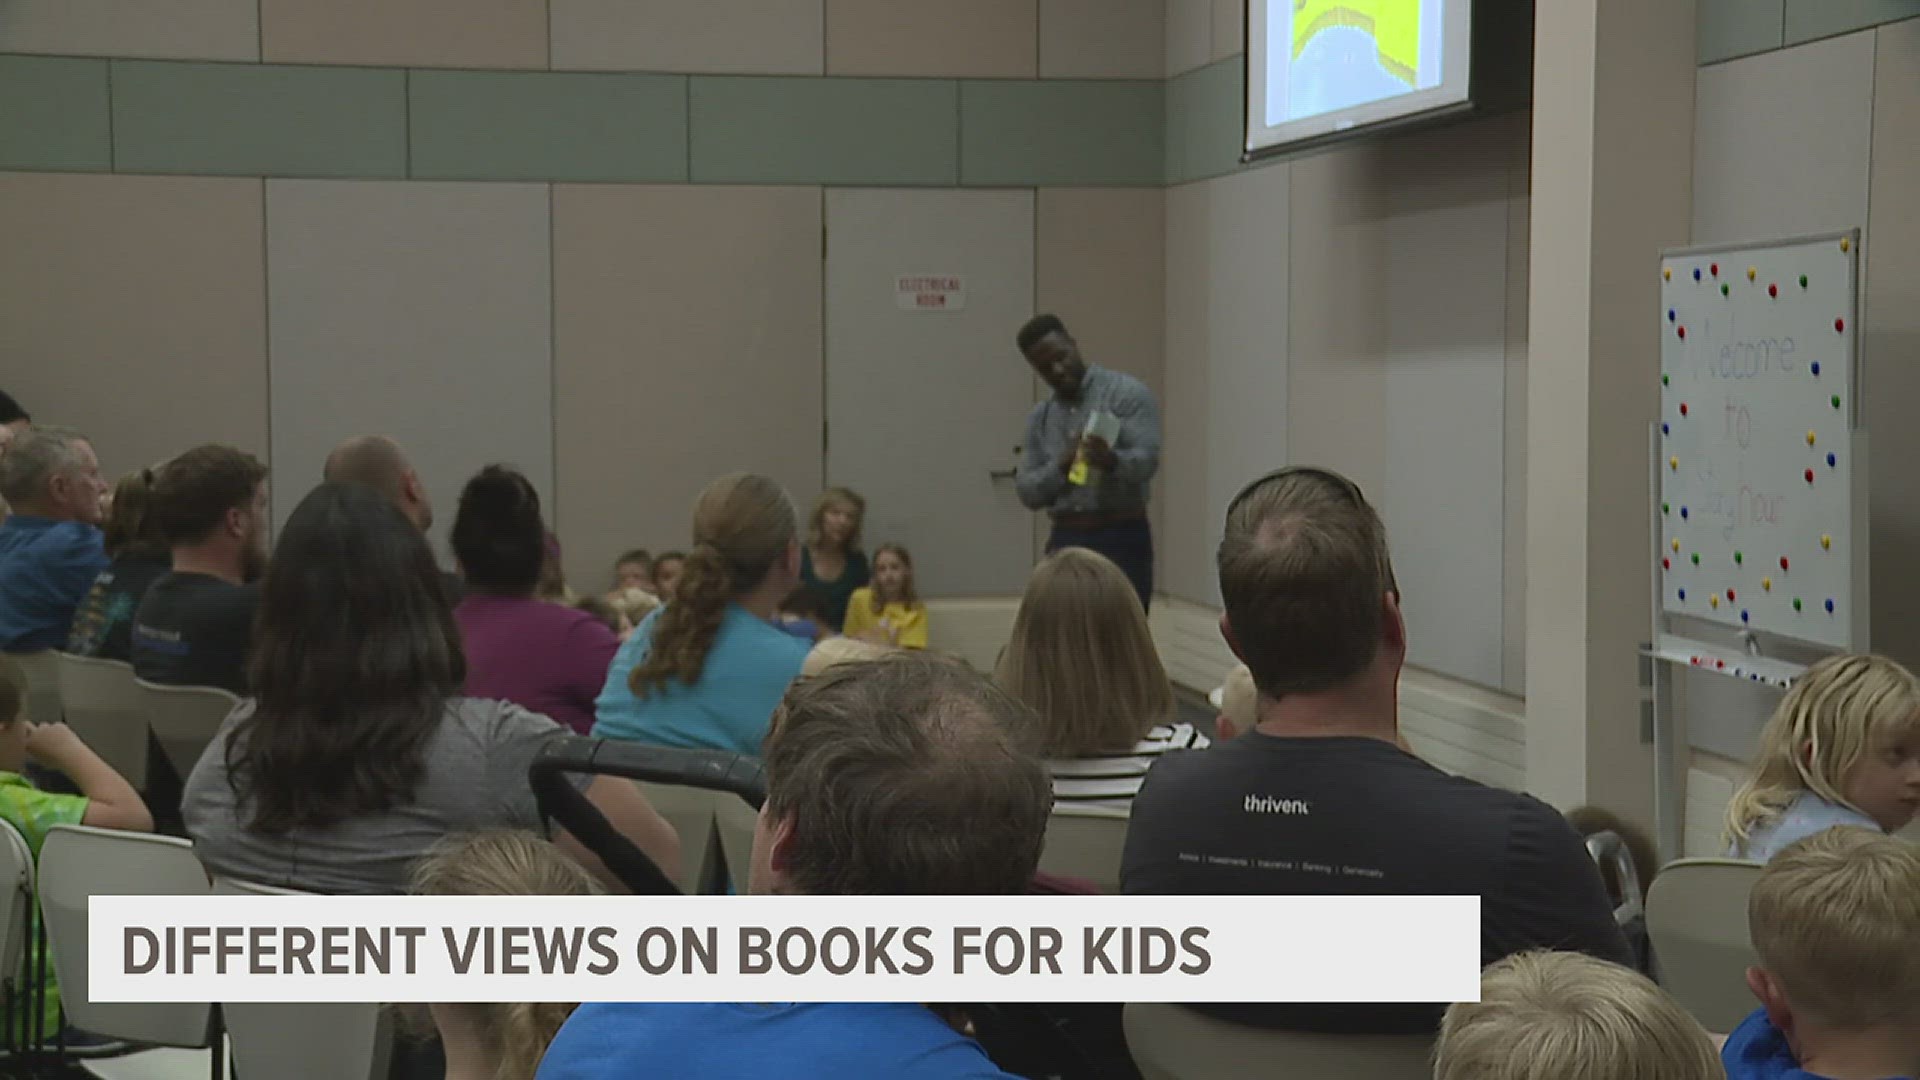 Two different story times took place in and outside of Bettendorf's public library. News 8's Jonathan Fong spoke with parents about their viewpoints.